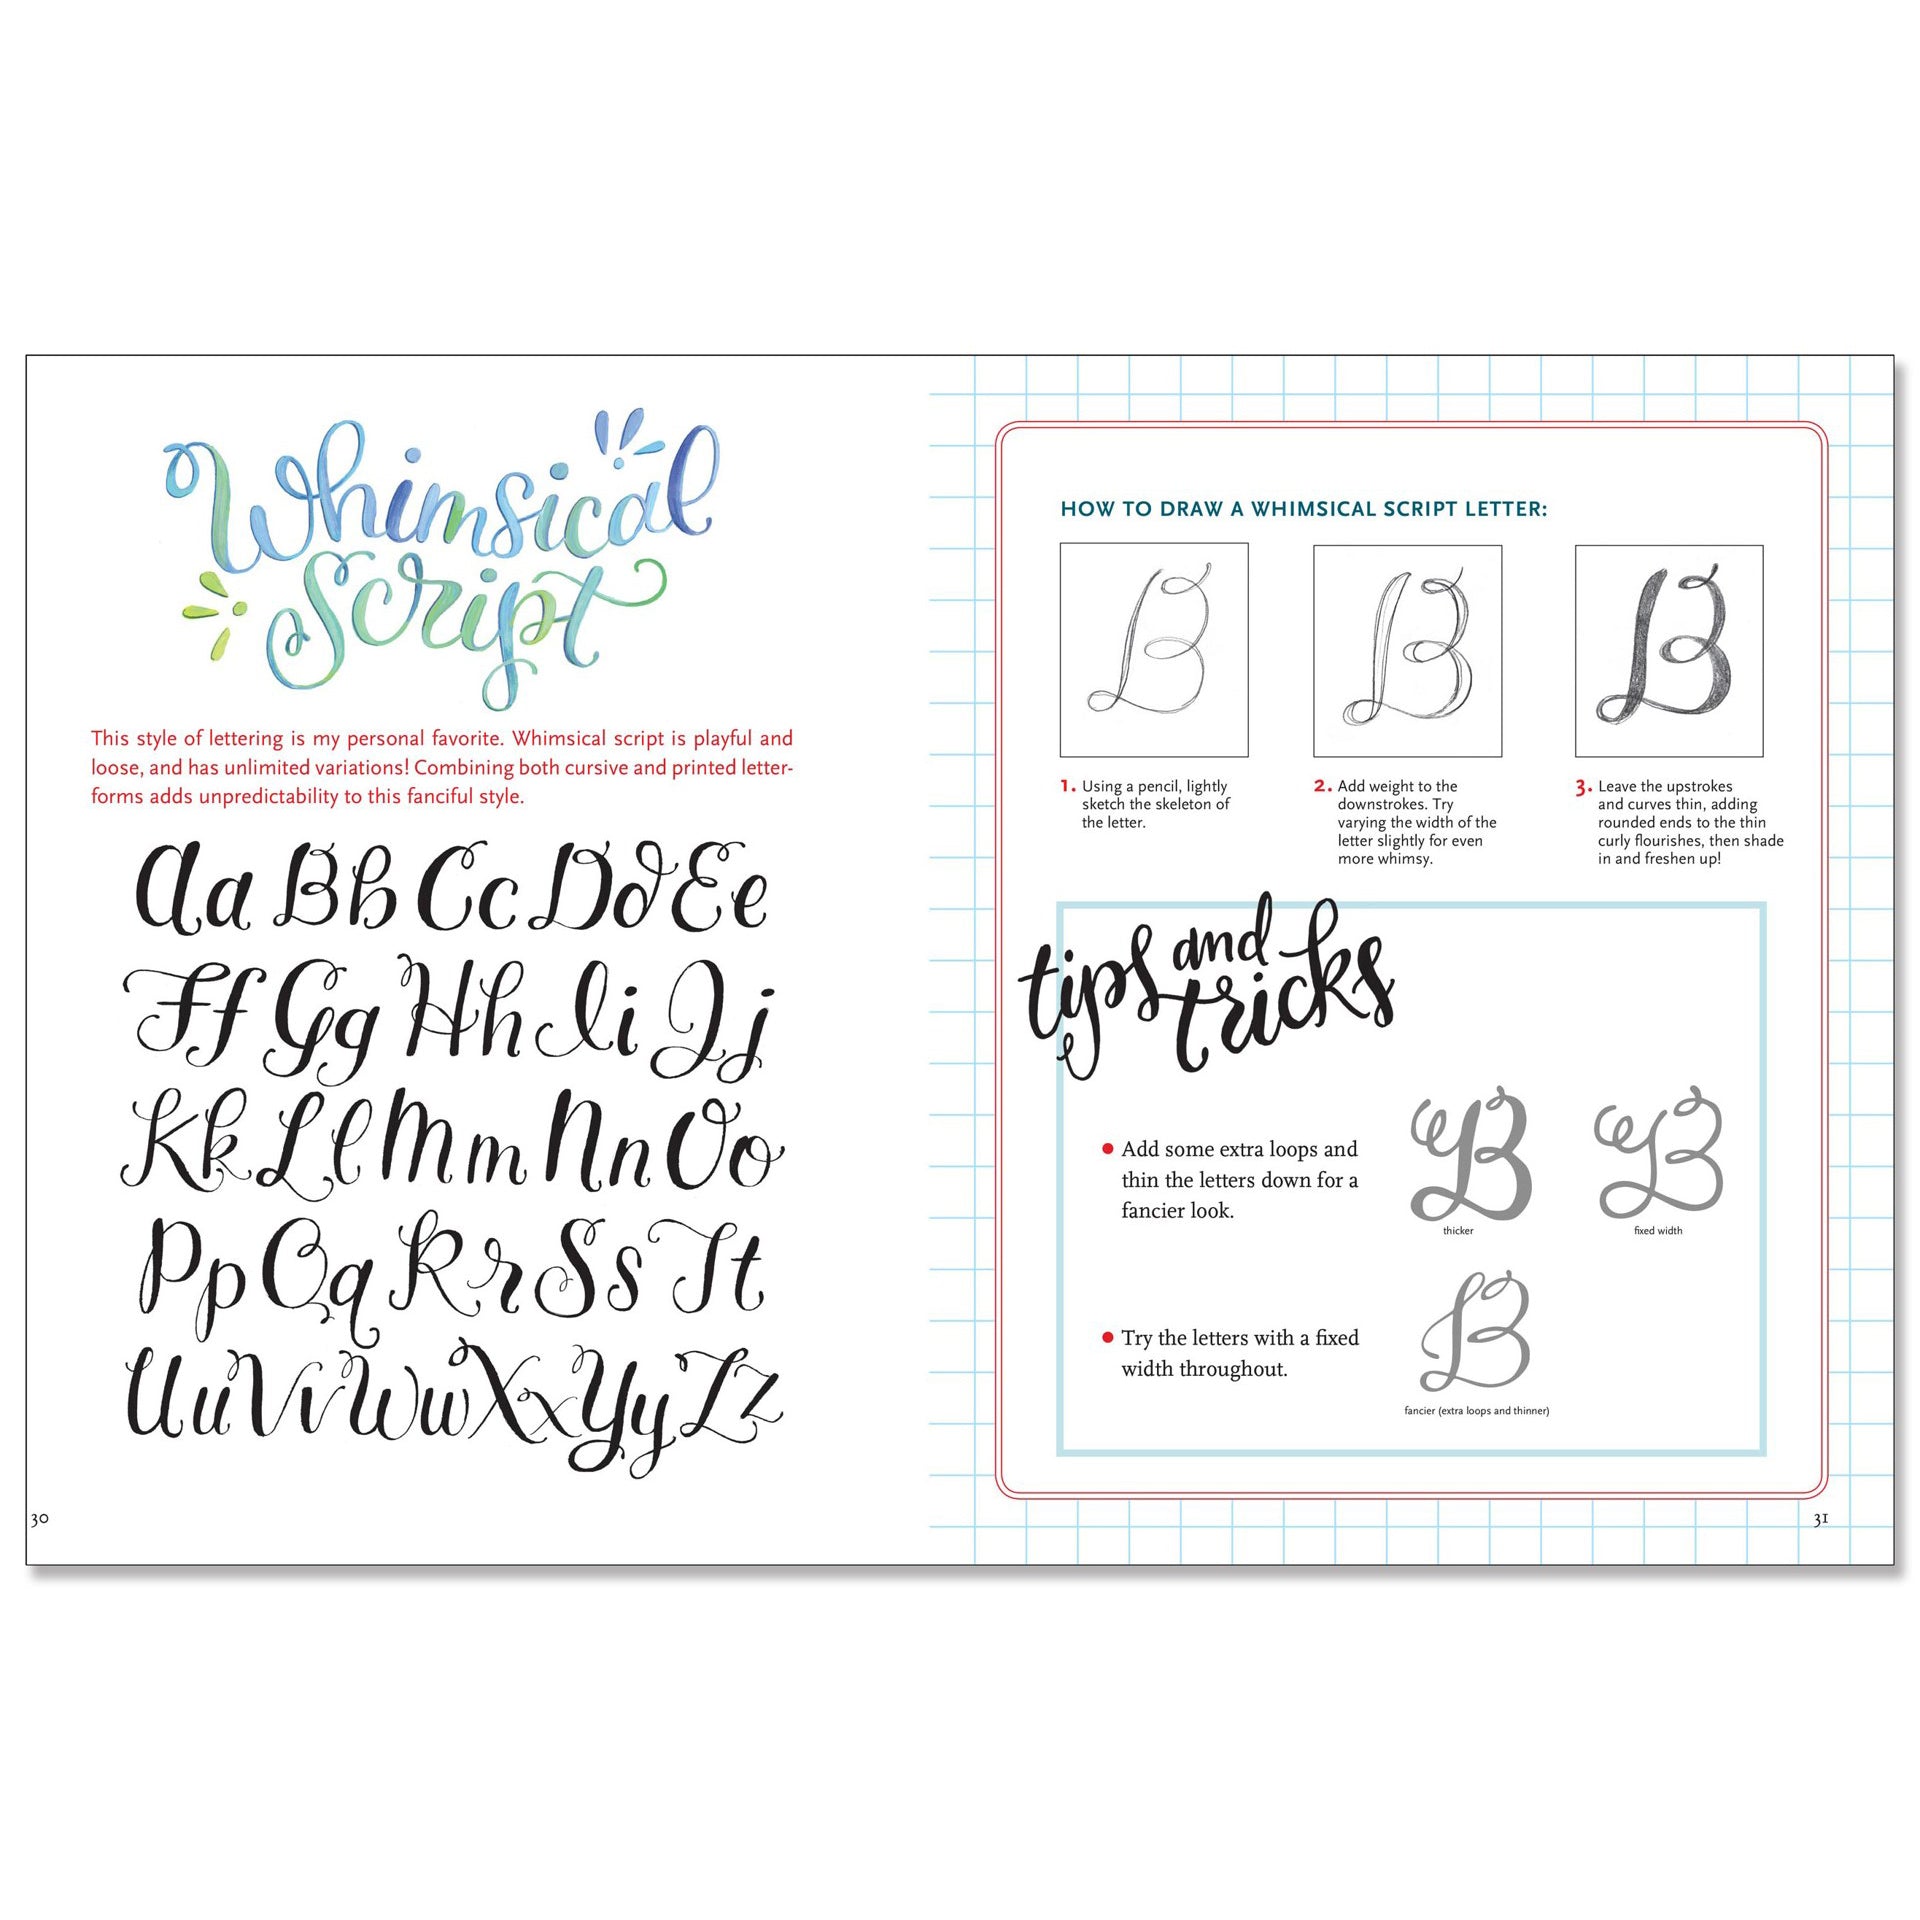 Hand Lettering - an interactive guide to the art of drawing letters - Paper Kooka